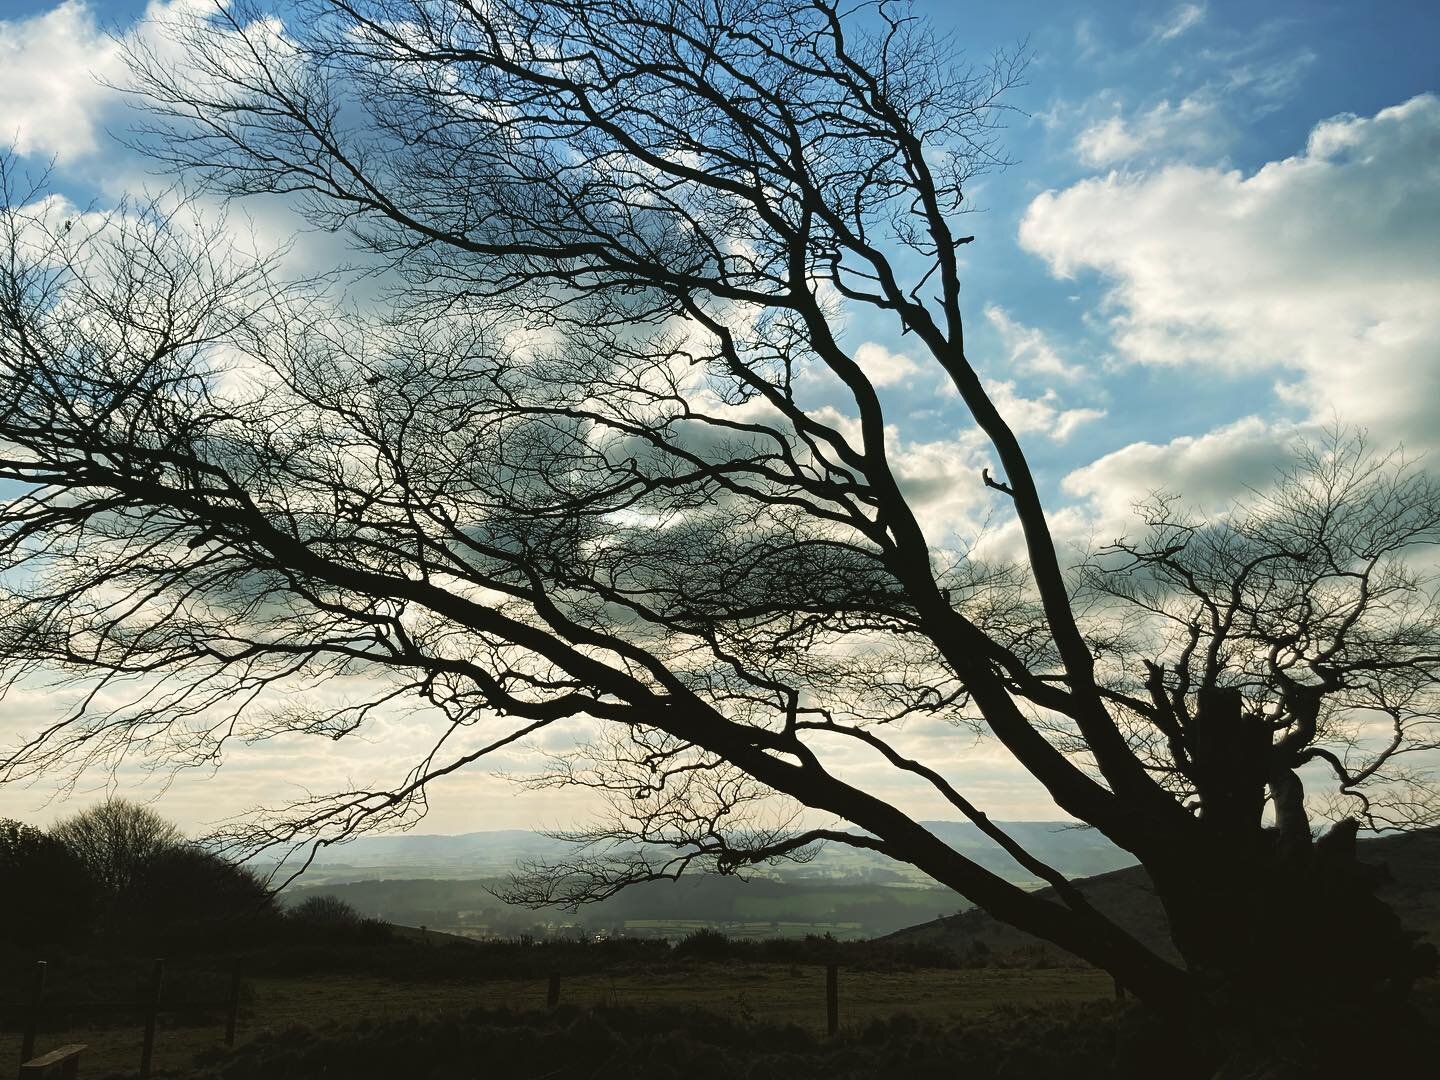 Beautiful walk in the Quantocks today and this tree ❤️